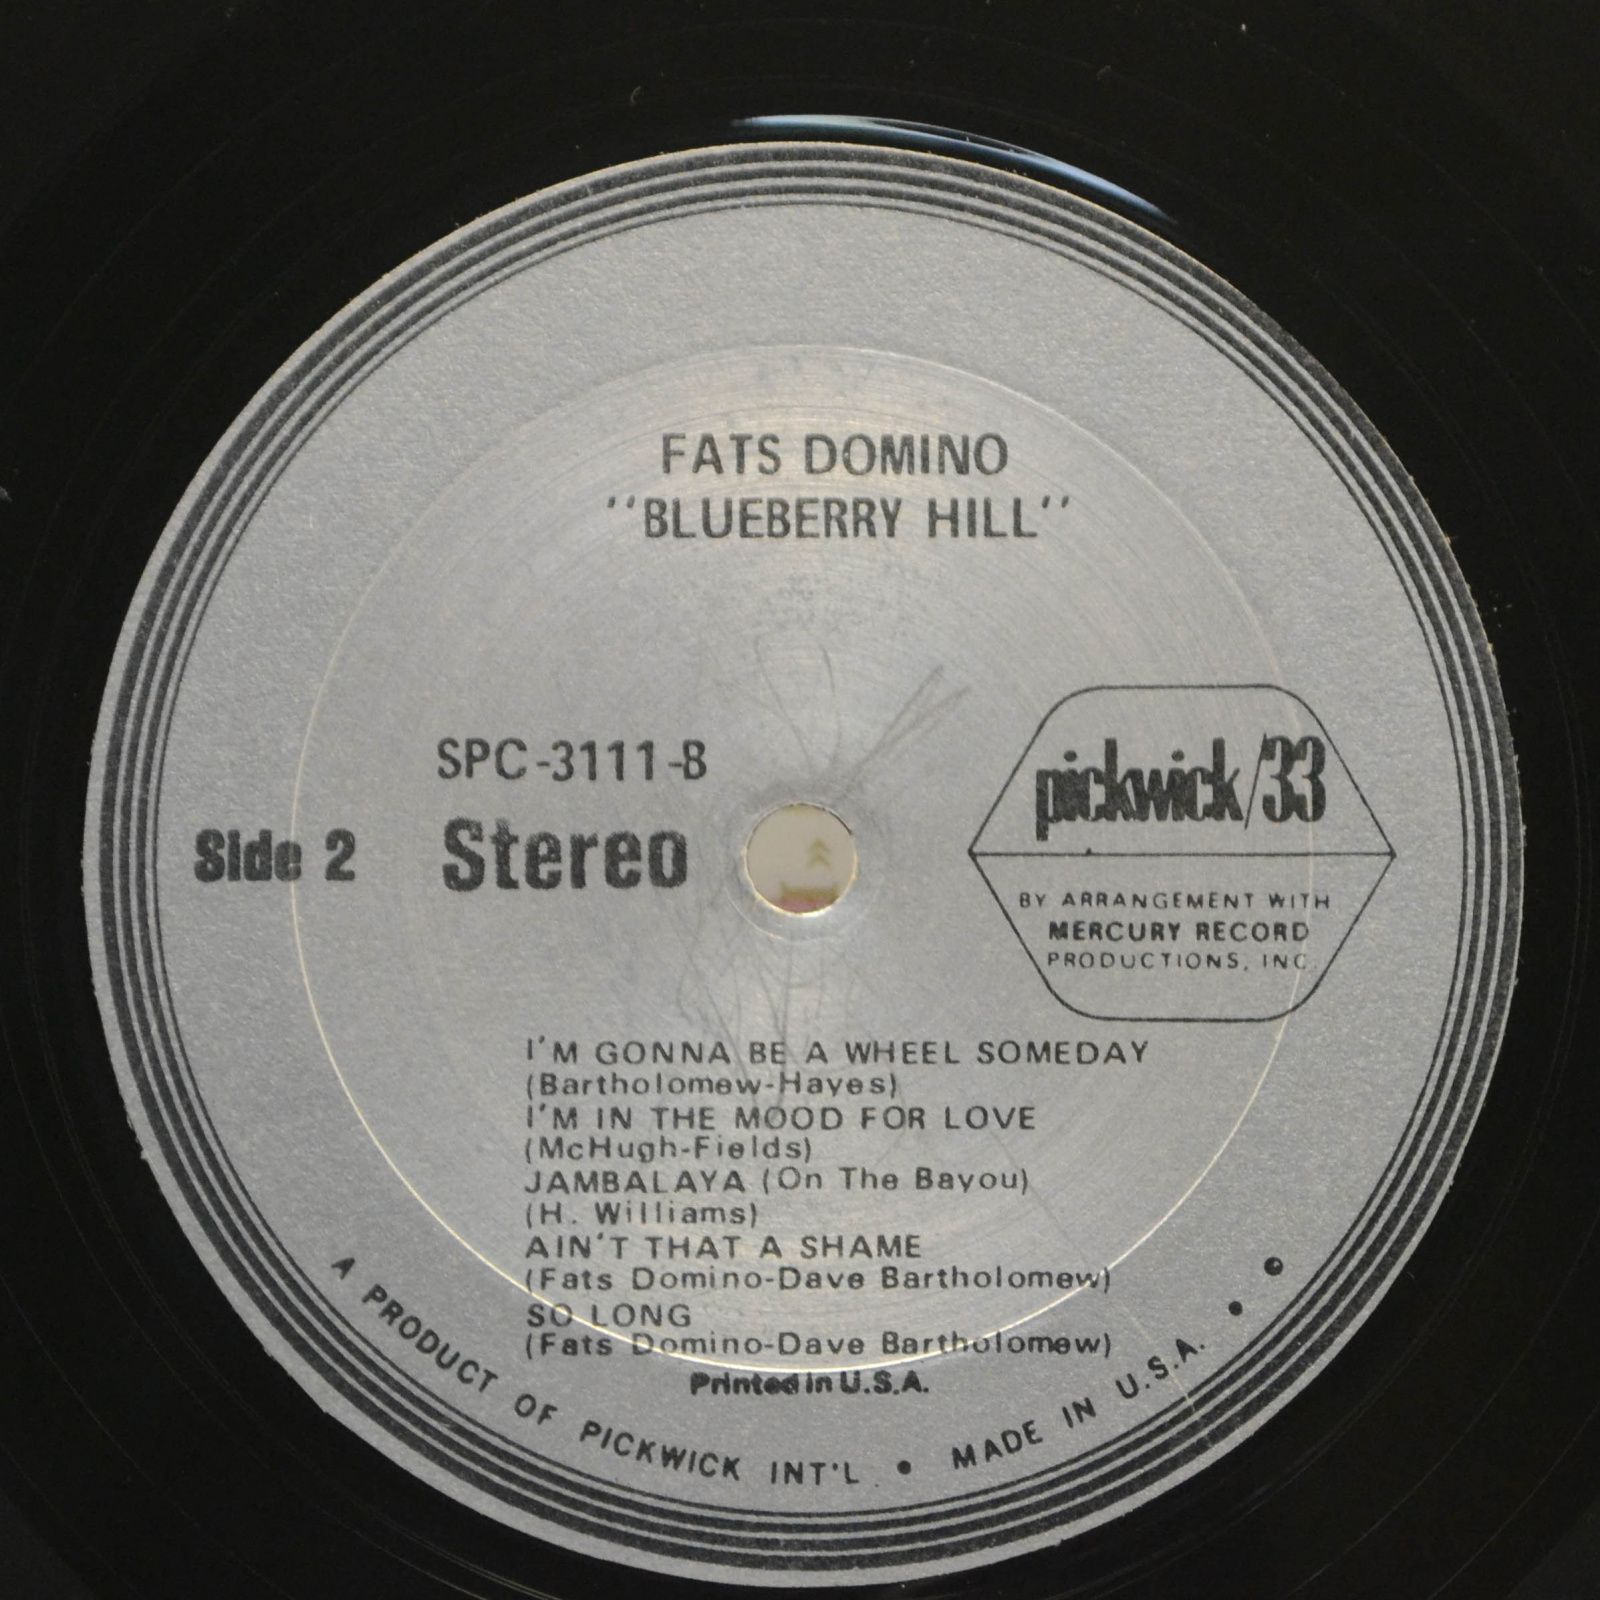 Fats Domino — Blueberry Hill, 1967